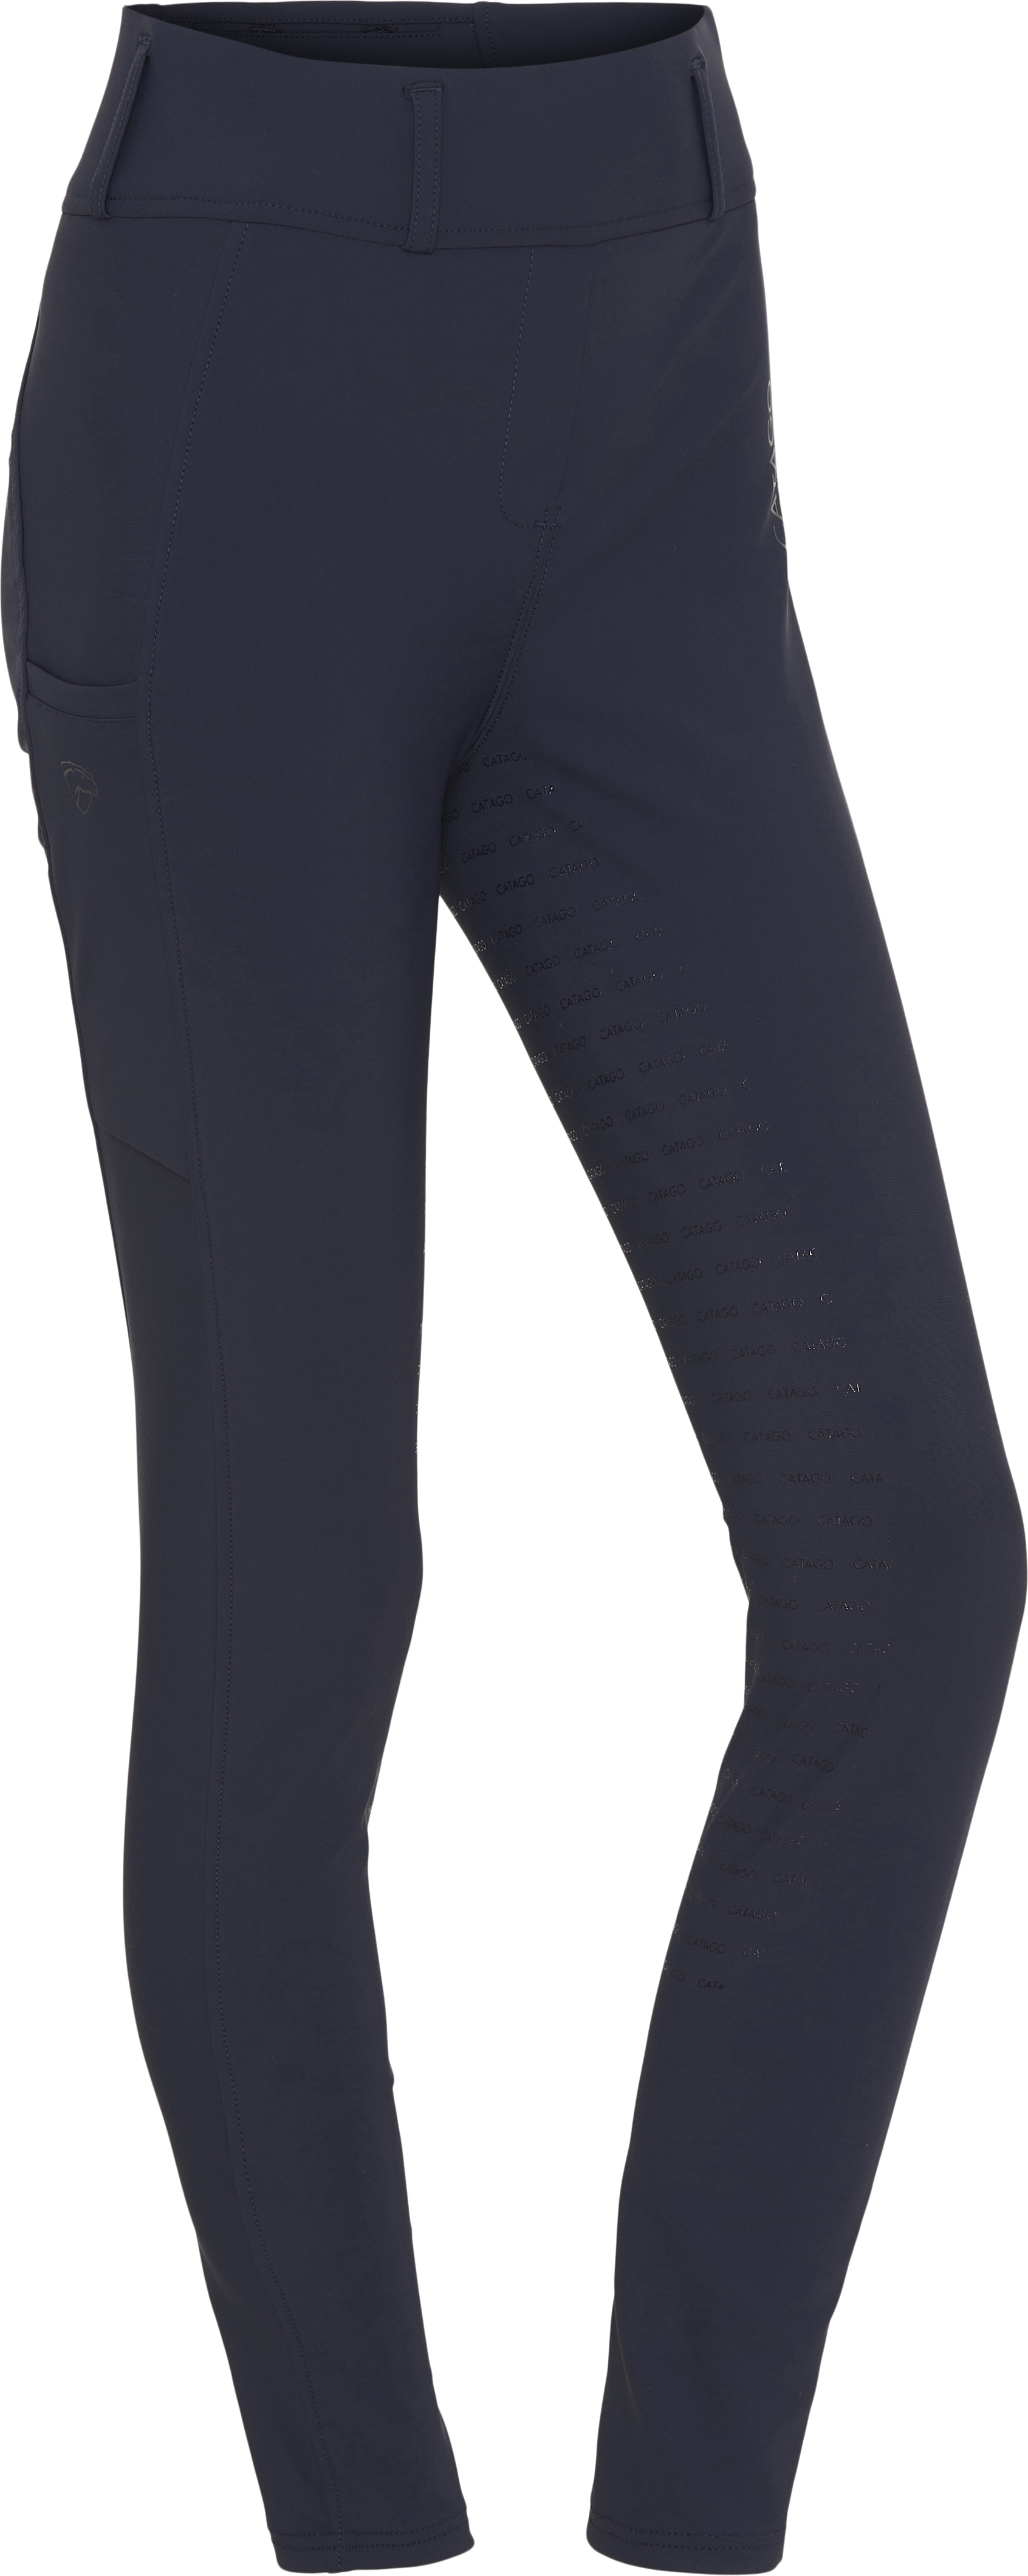 CATAGO River Tights Fullgrip With Belt Loops - Navy (XL), Catago